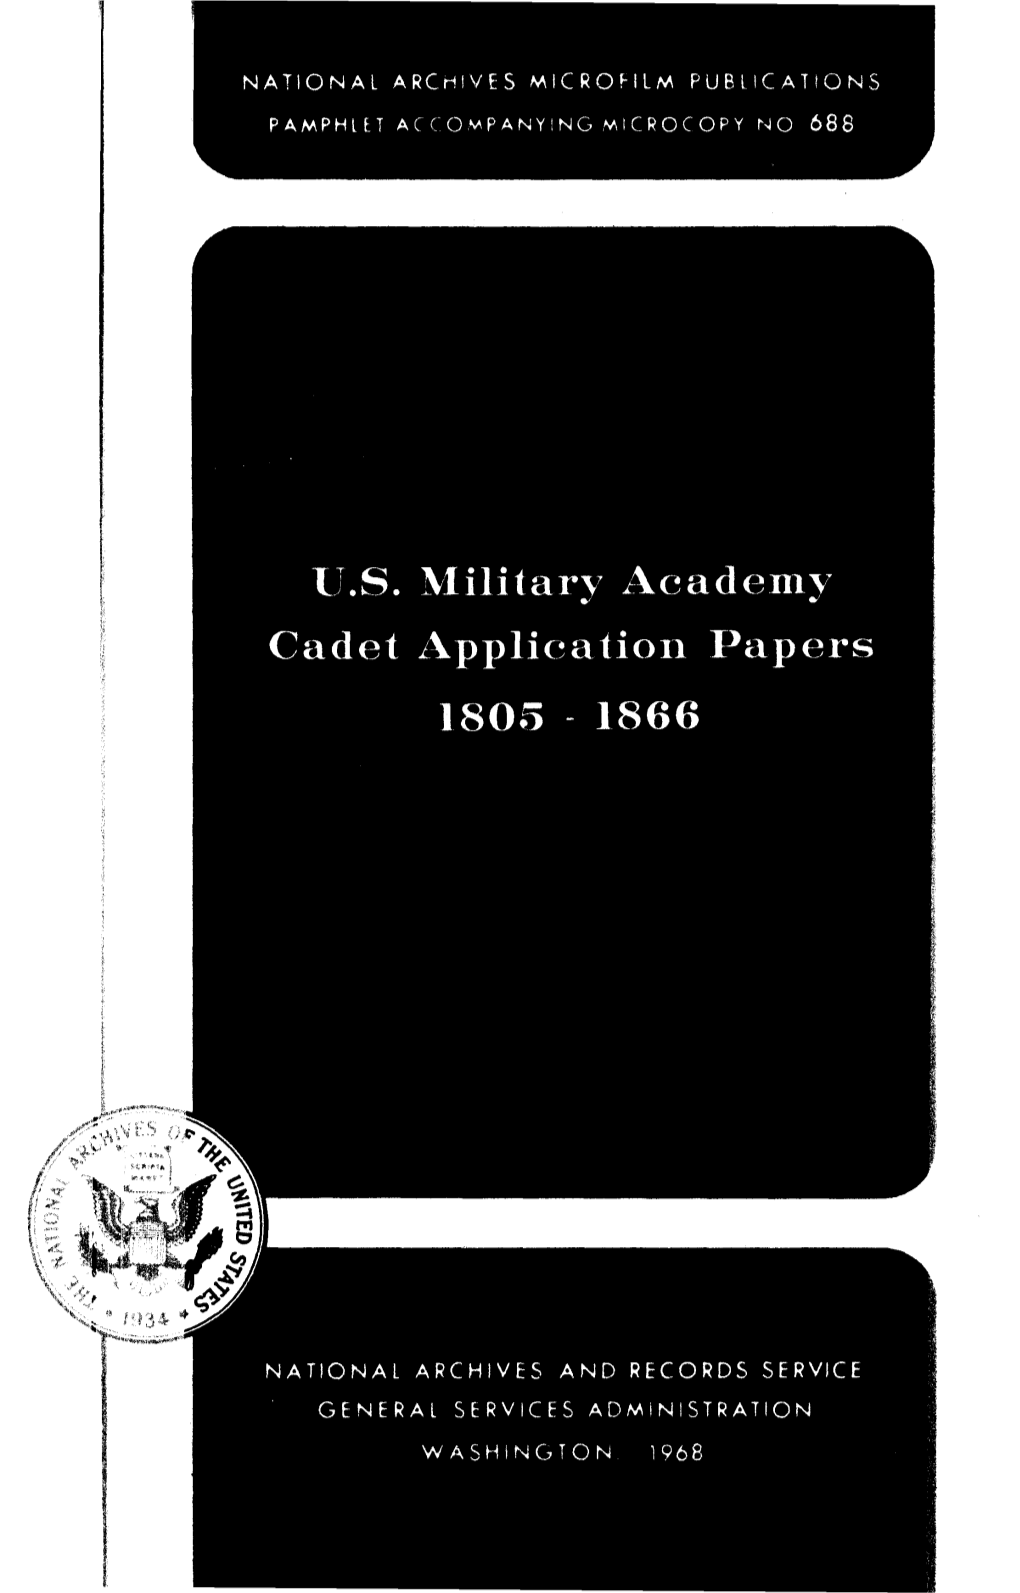 Military Academy Cadet Application Papers, 1805-1866